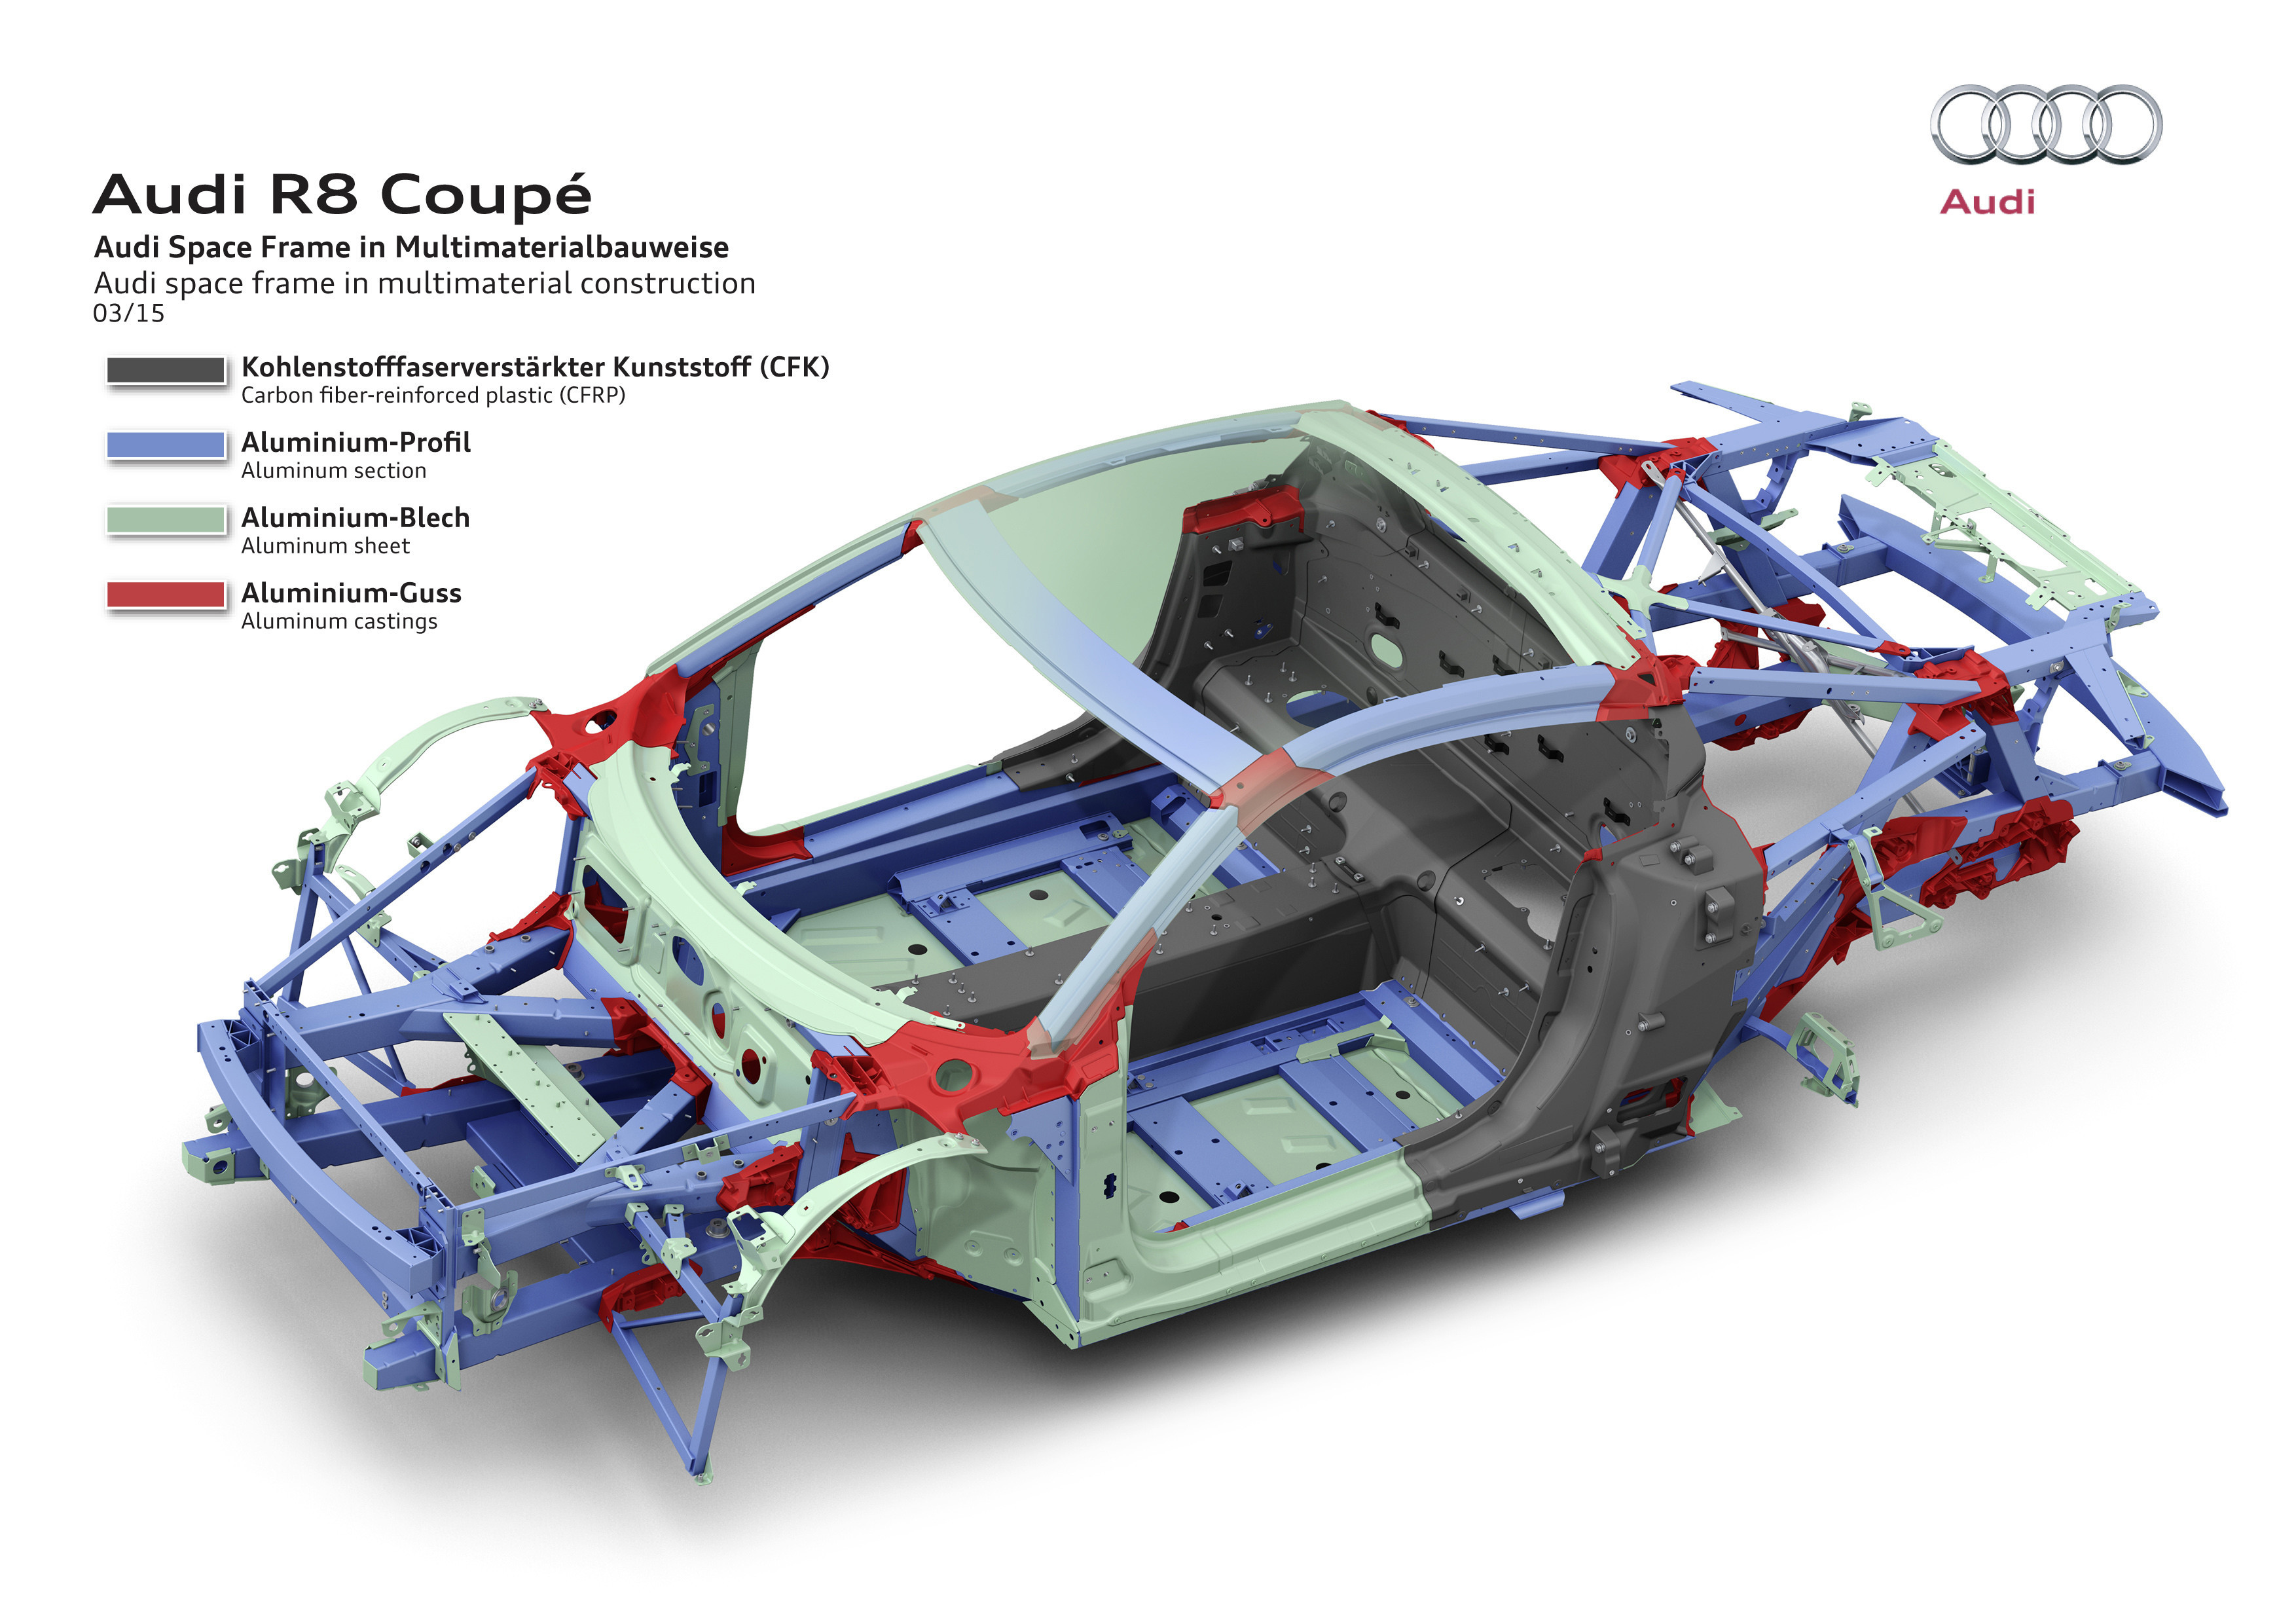 Audi space frame in multimaterial construction